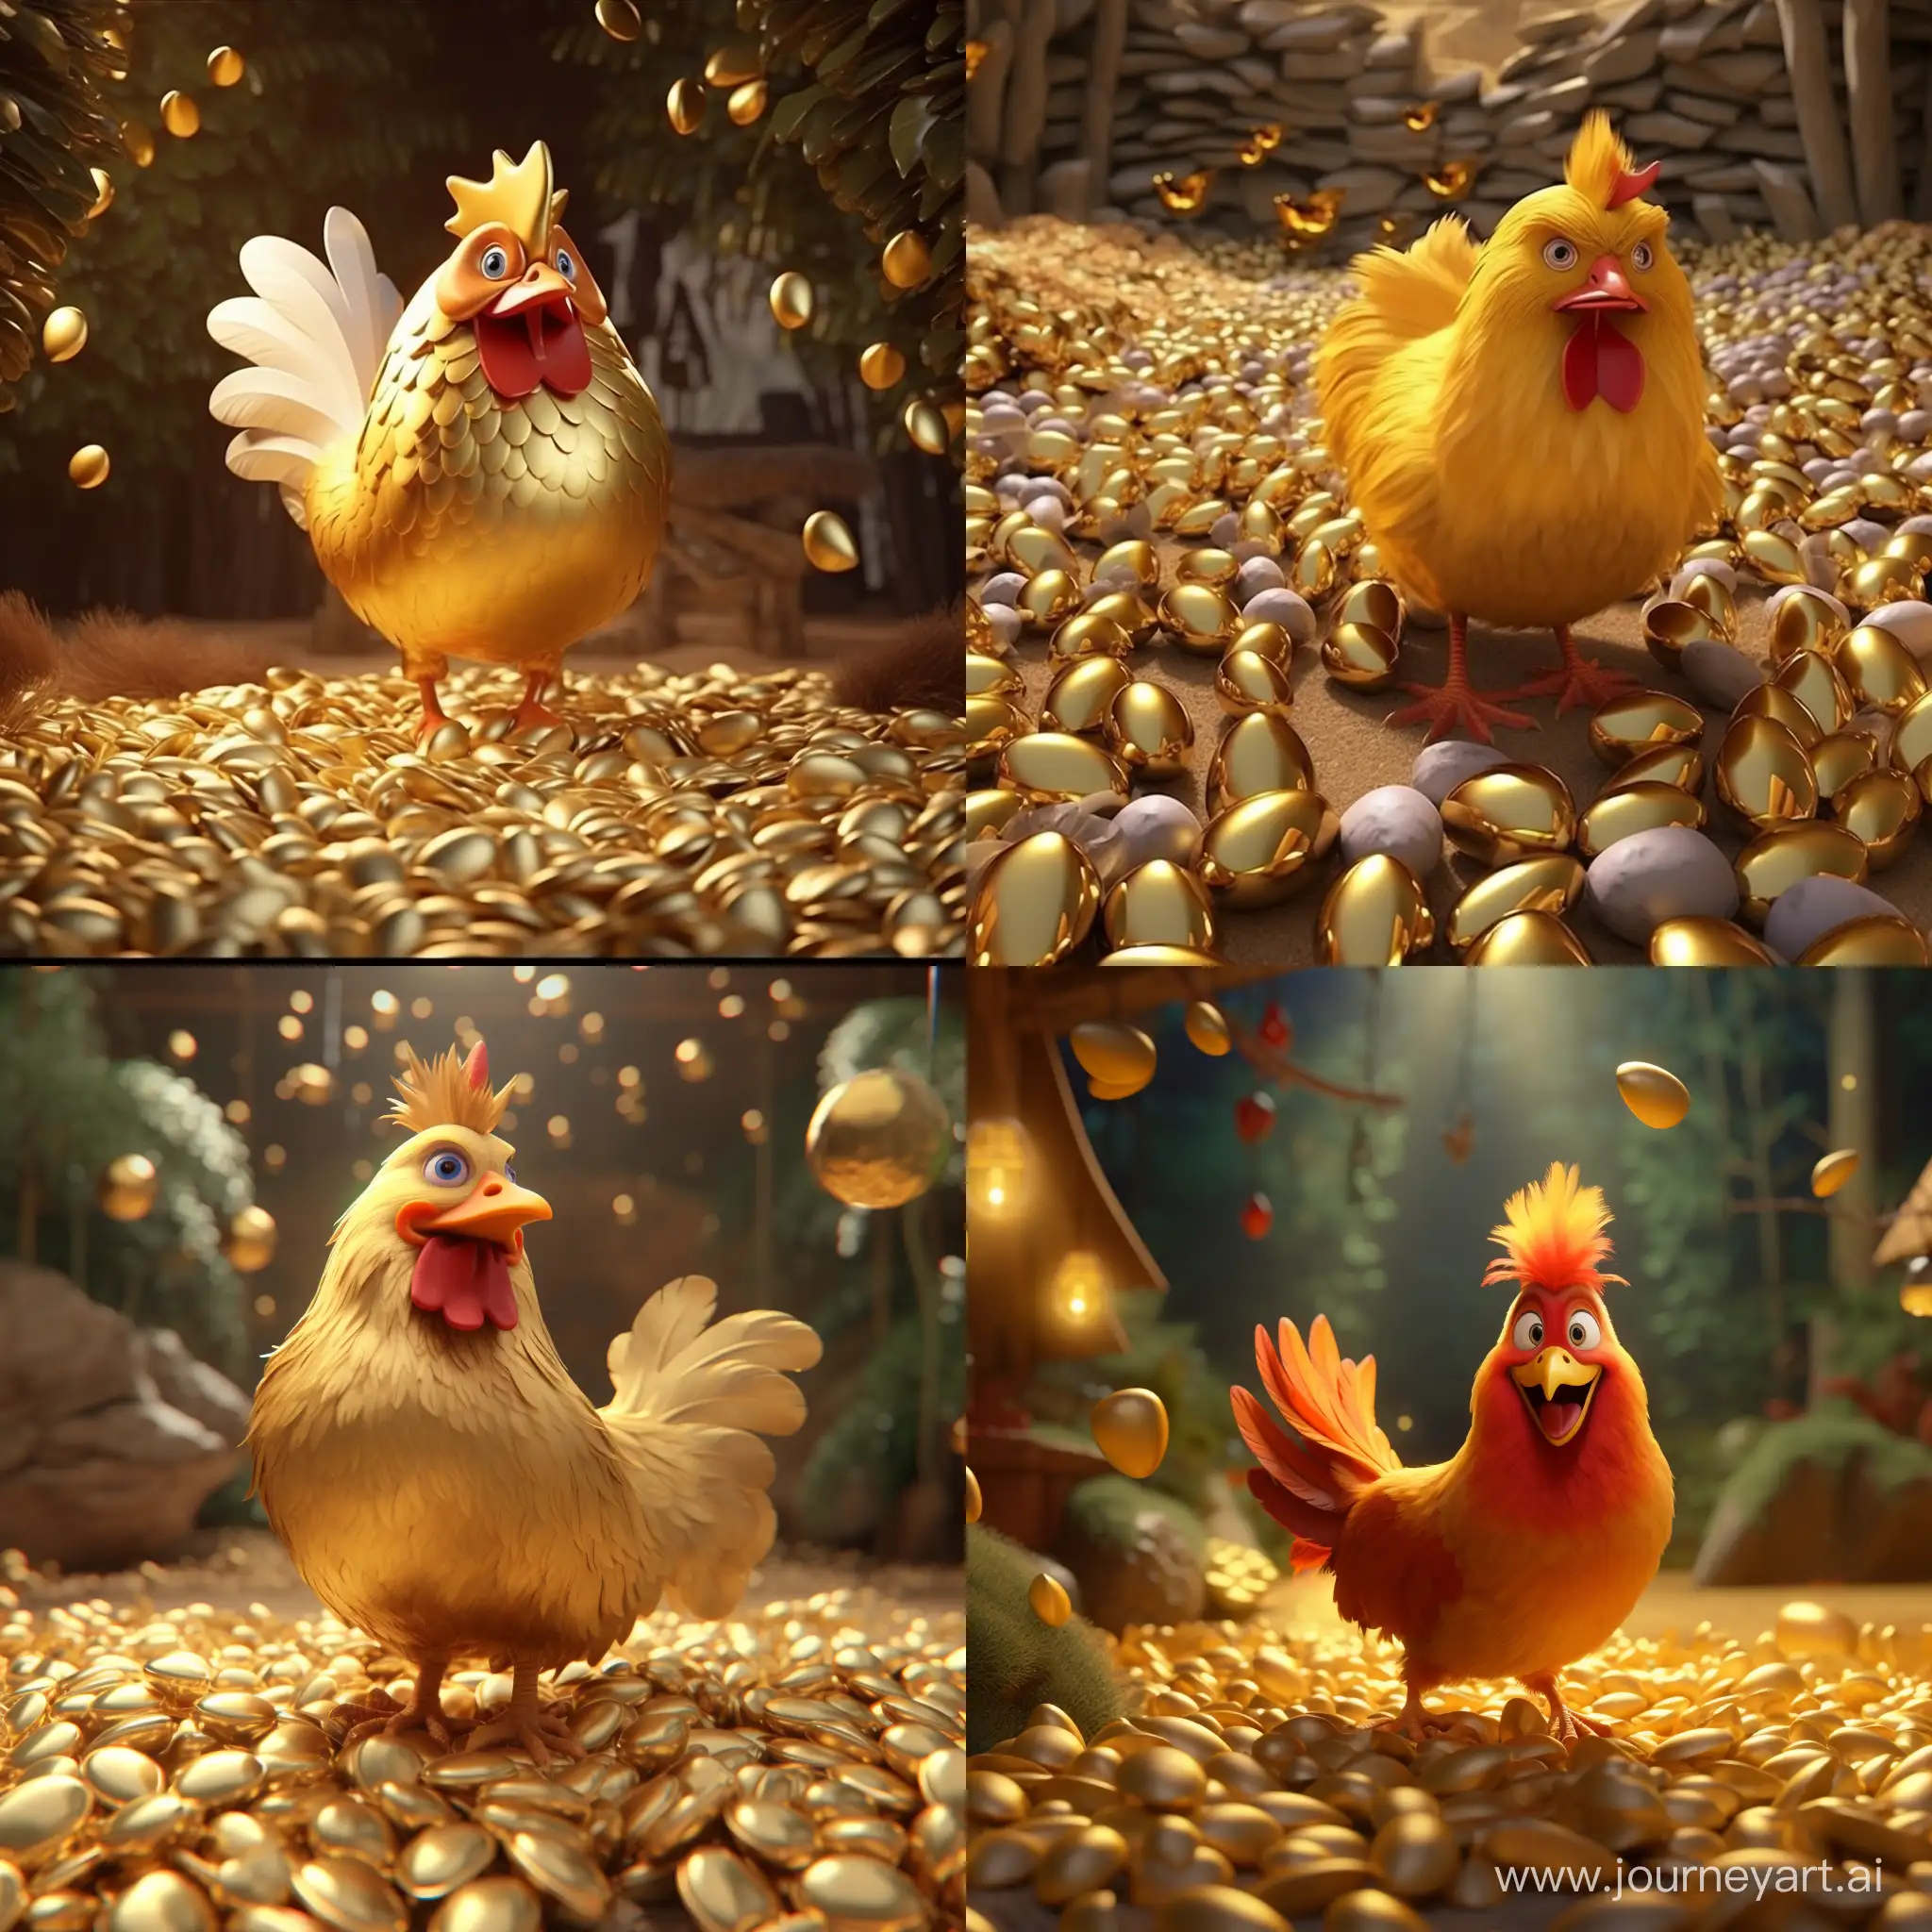 Gleaming-Golden-Eggs-Nestled-around-Majestic-3D-Animated-Chicken